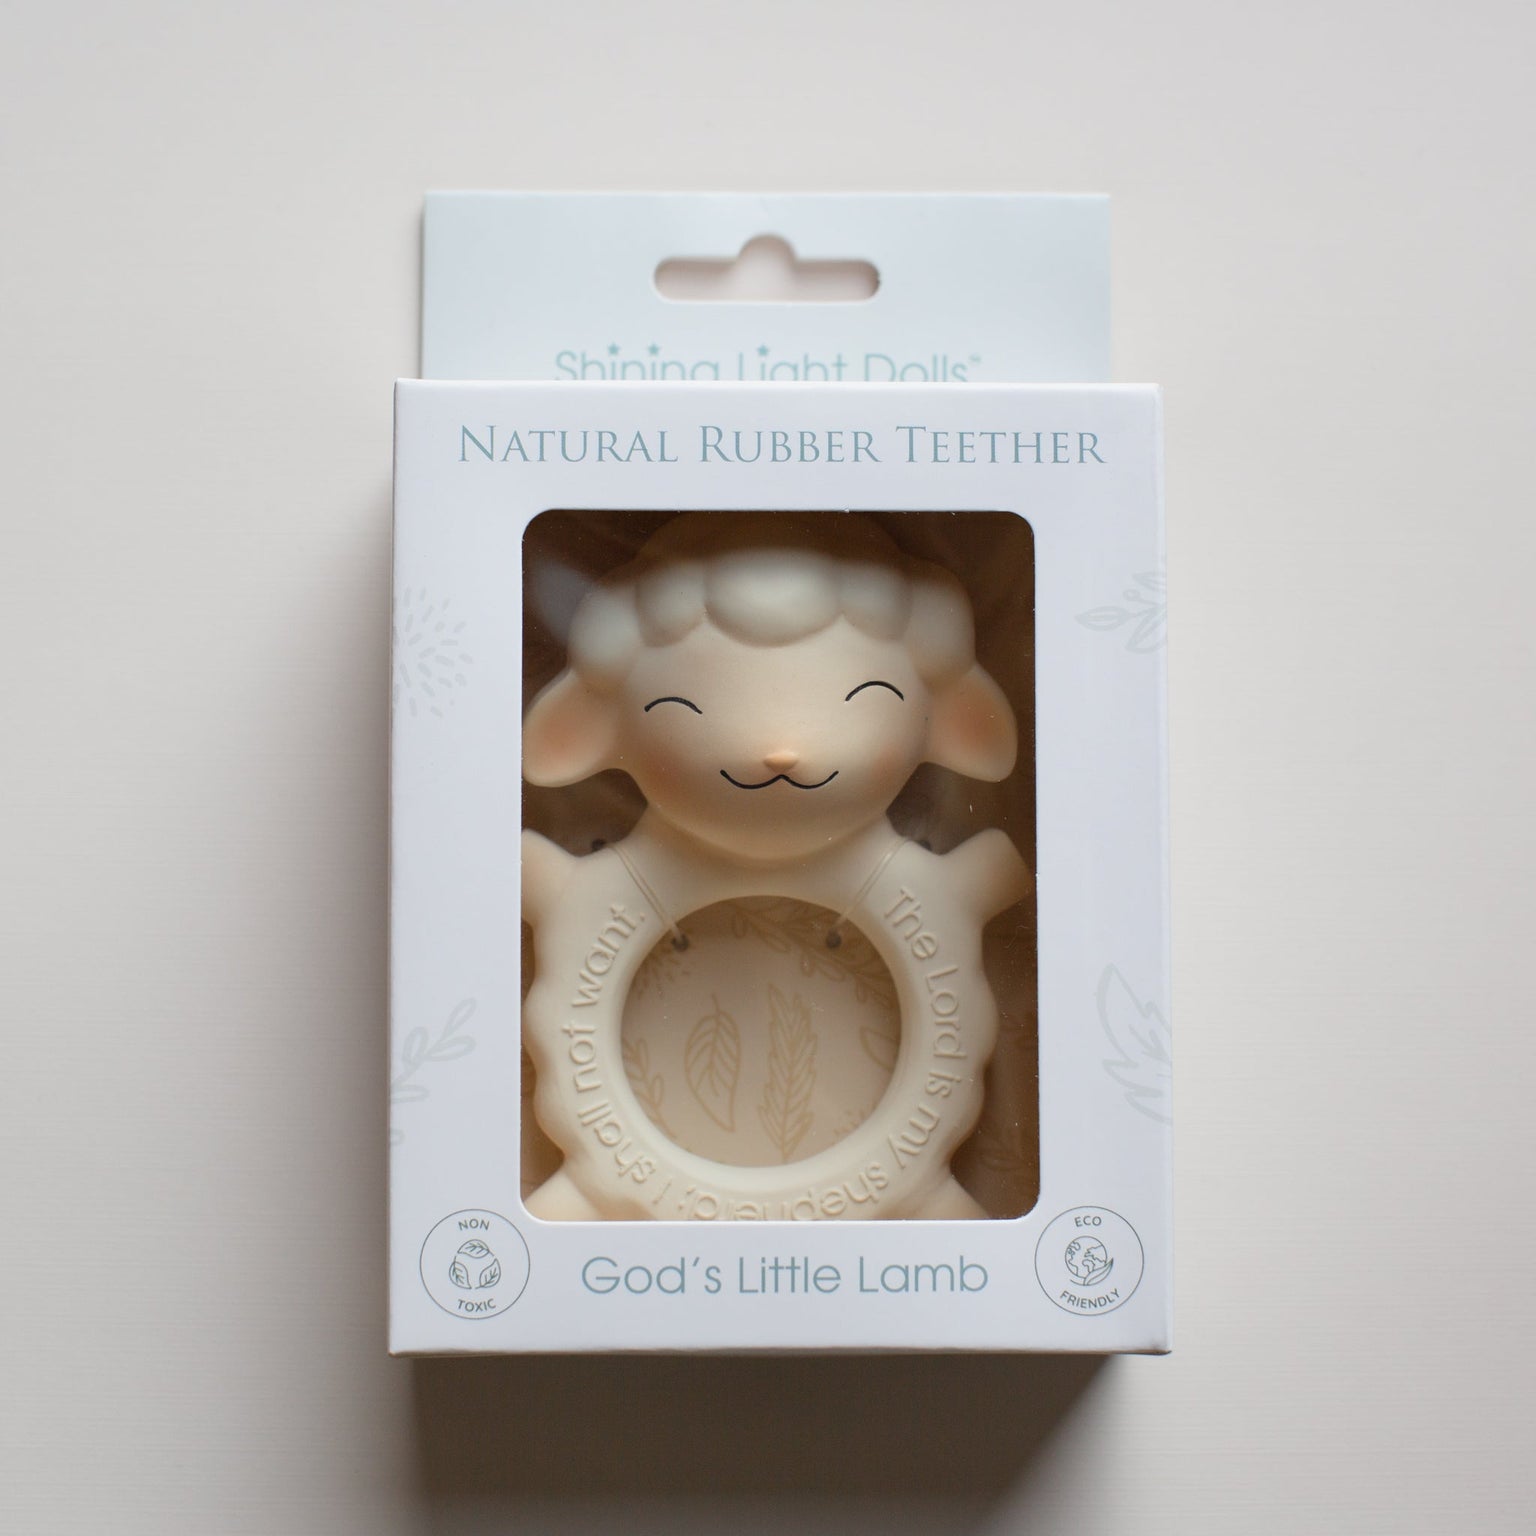 God’s Little Lamb Natural Rubber Teether